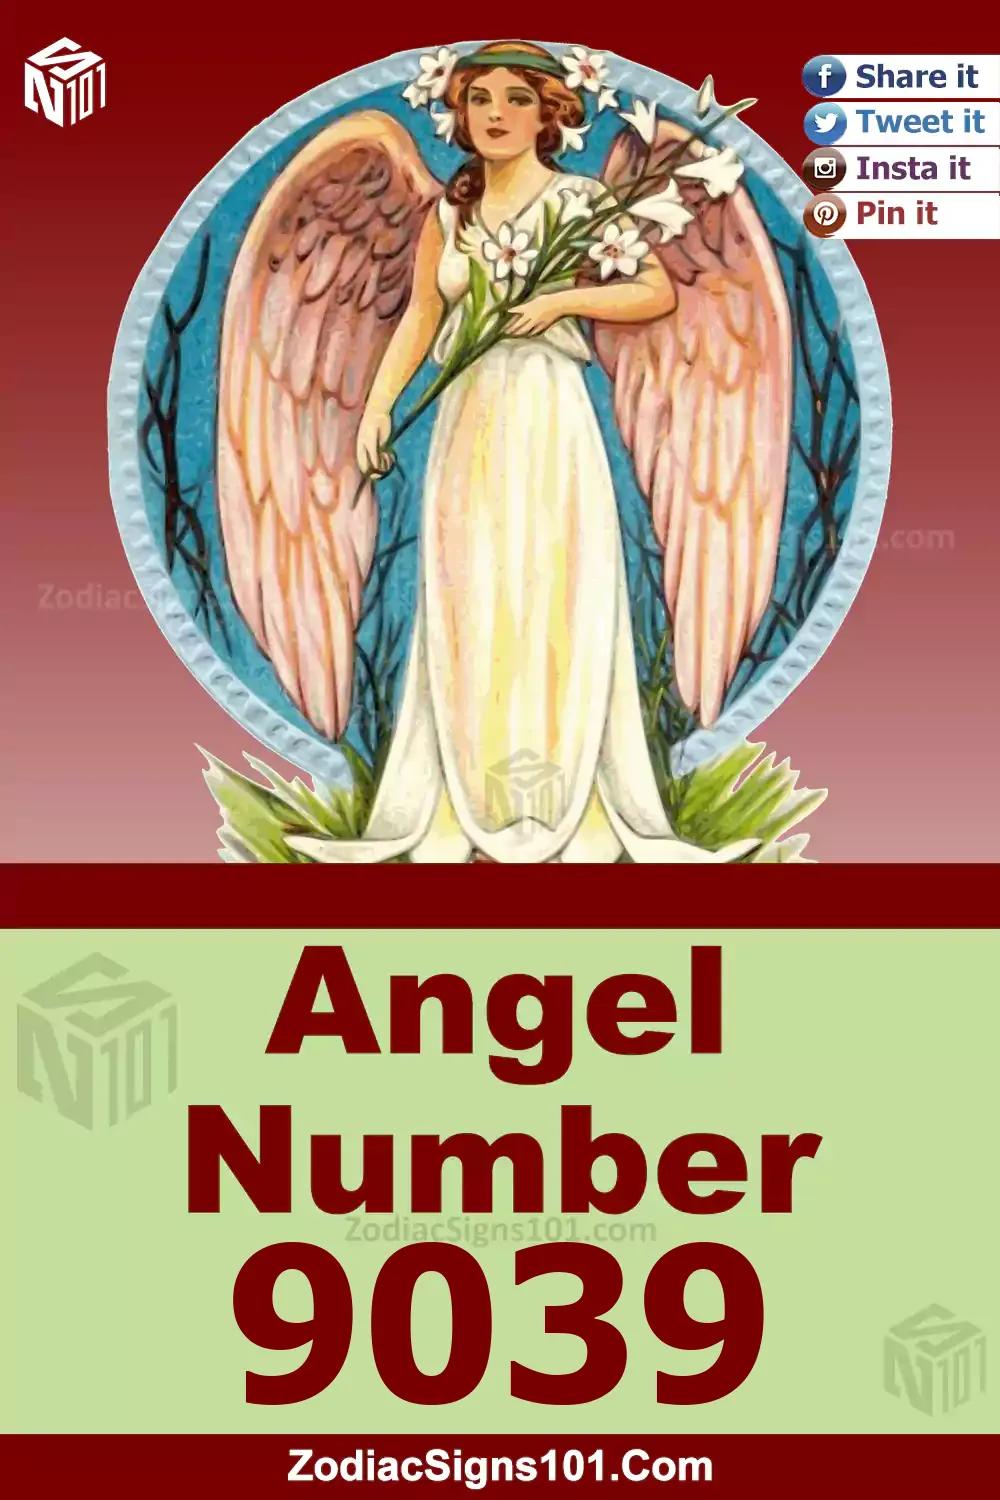 9039 Angel Number Meaning